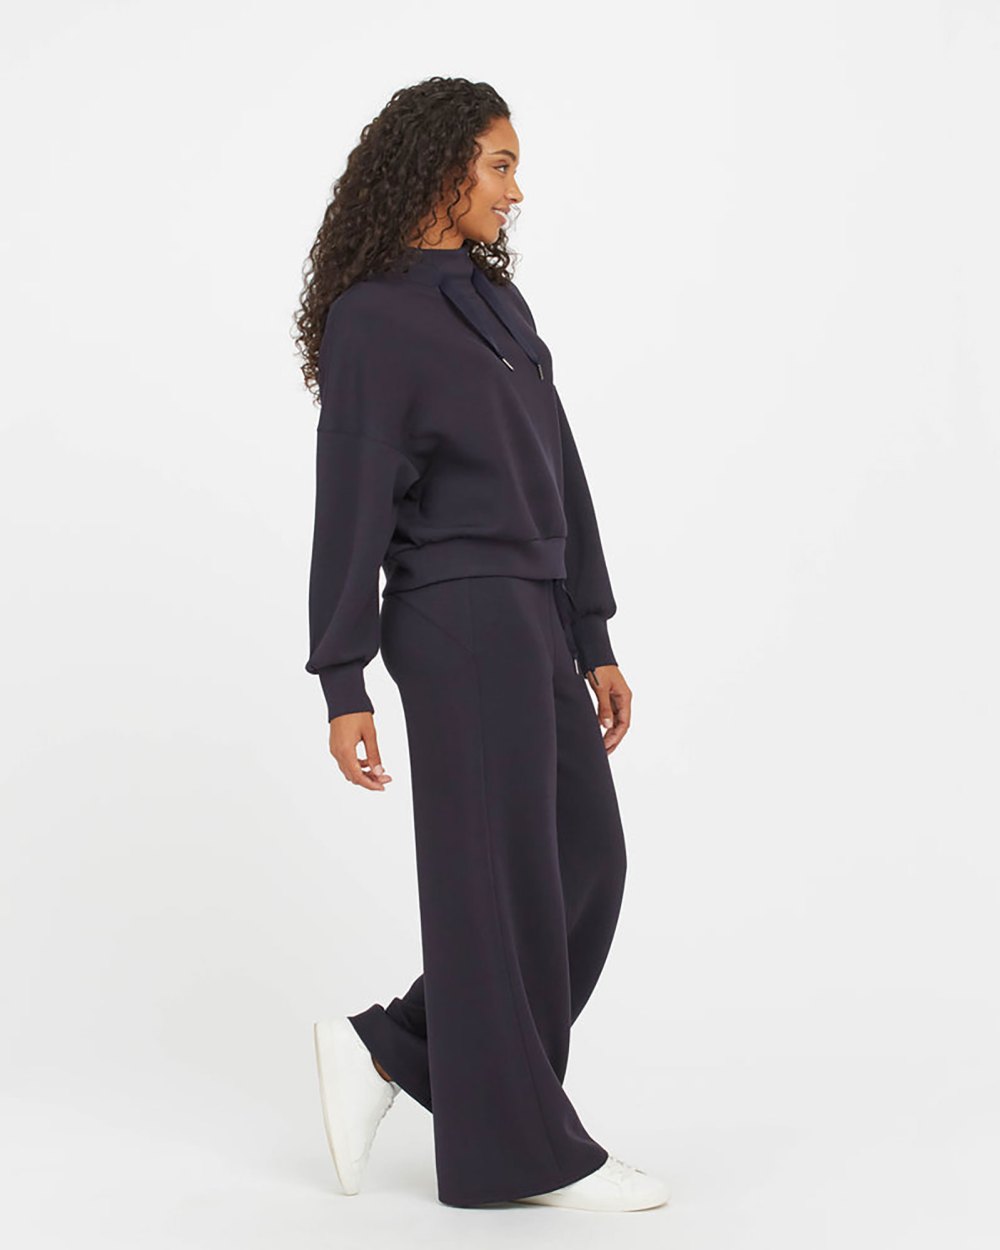 Loungewear Just Got More ‘Flattering’! The Spanx Wide Leg Pant is So Chic and Comfortable